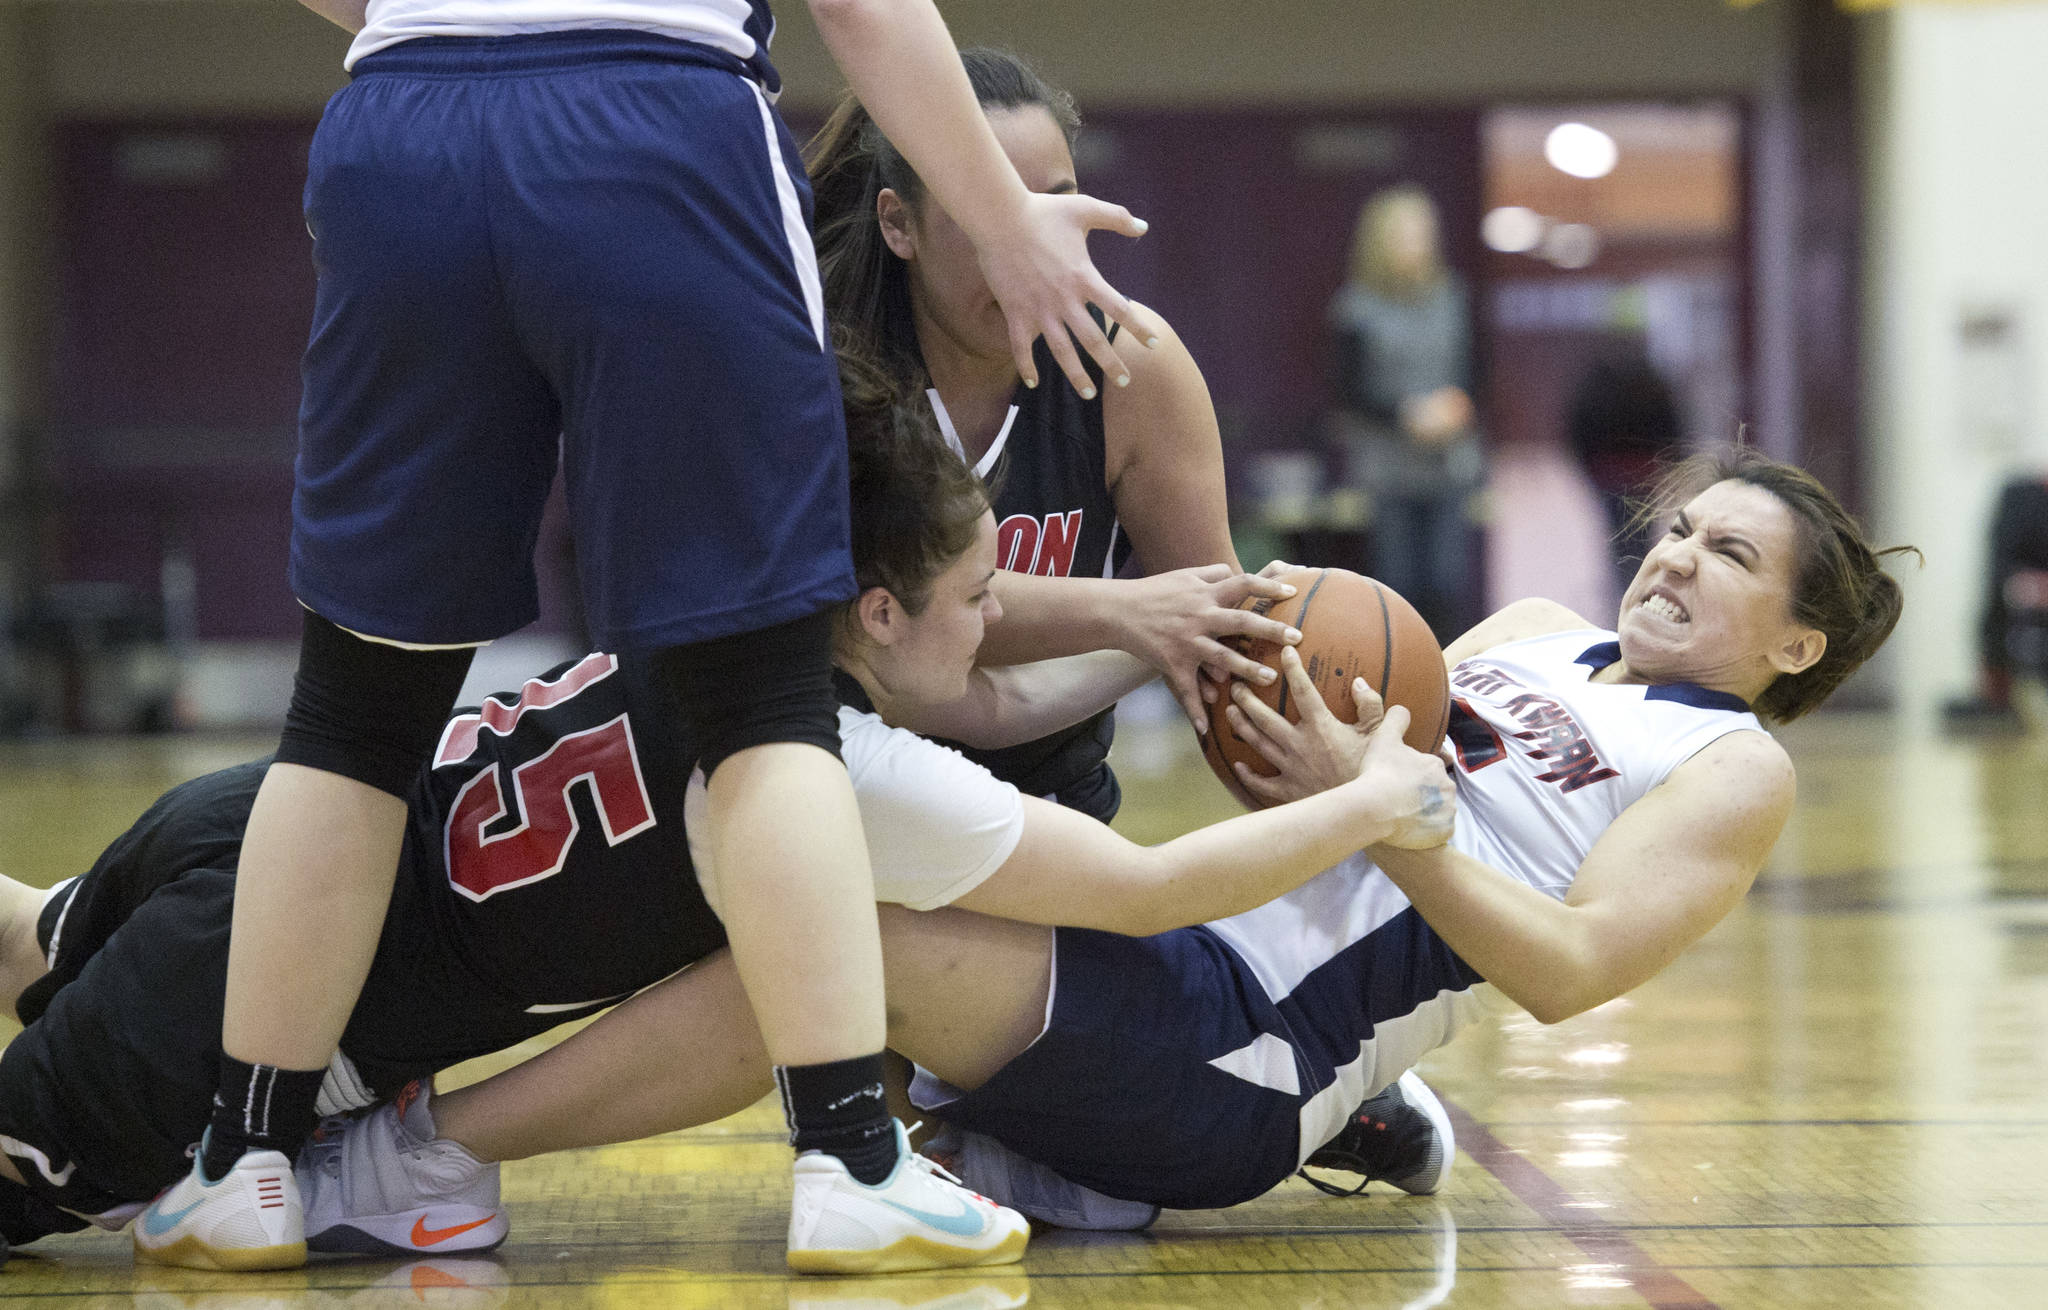 Yakutat’s Lorena Williams, right, wrestles with Angoon’s Roxann Braley, left, and Rosanna See for the ball during the Women’s Bracket game in the Lions Club’s Gold Medal Basketball Tournament at Juneau-Douglas High School on Tuesday. Yakutat won 61-41. (Michael Penn | Juneau Empire)